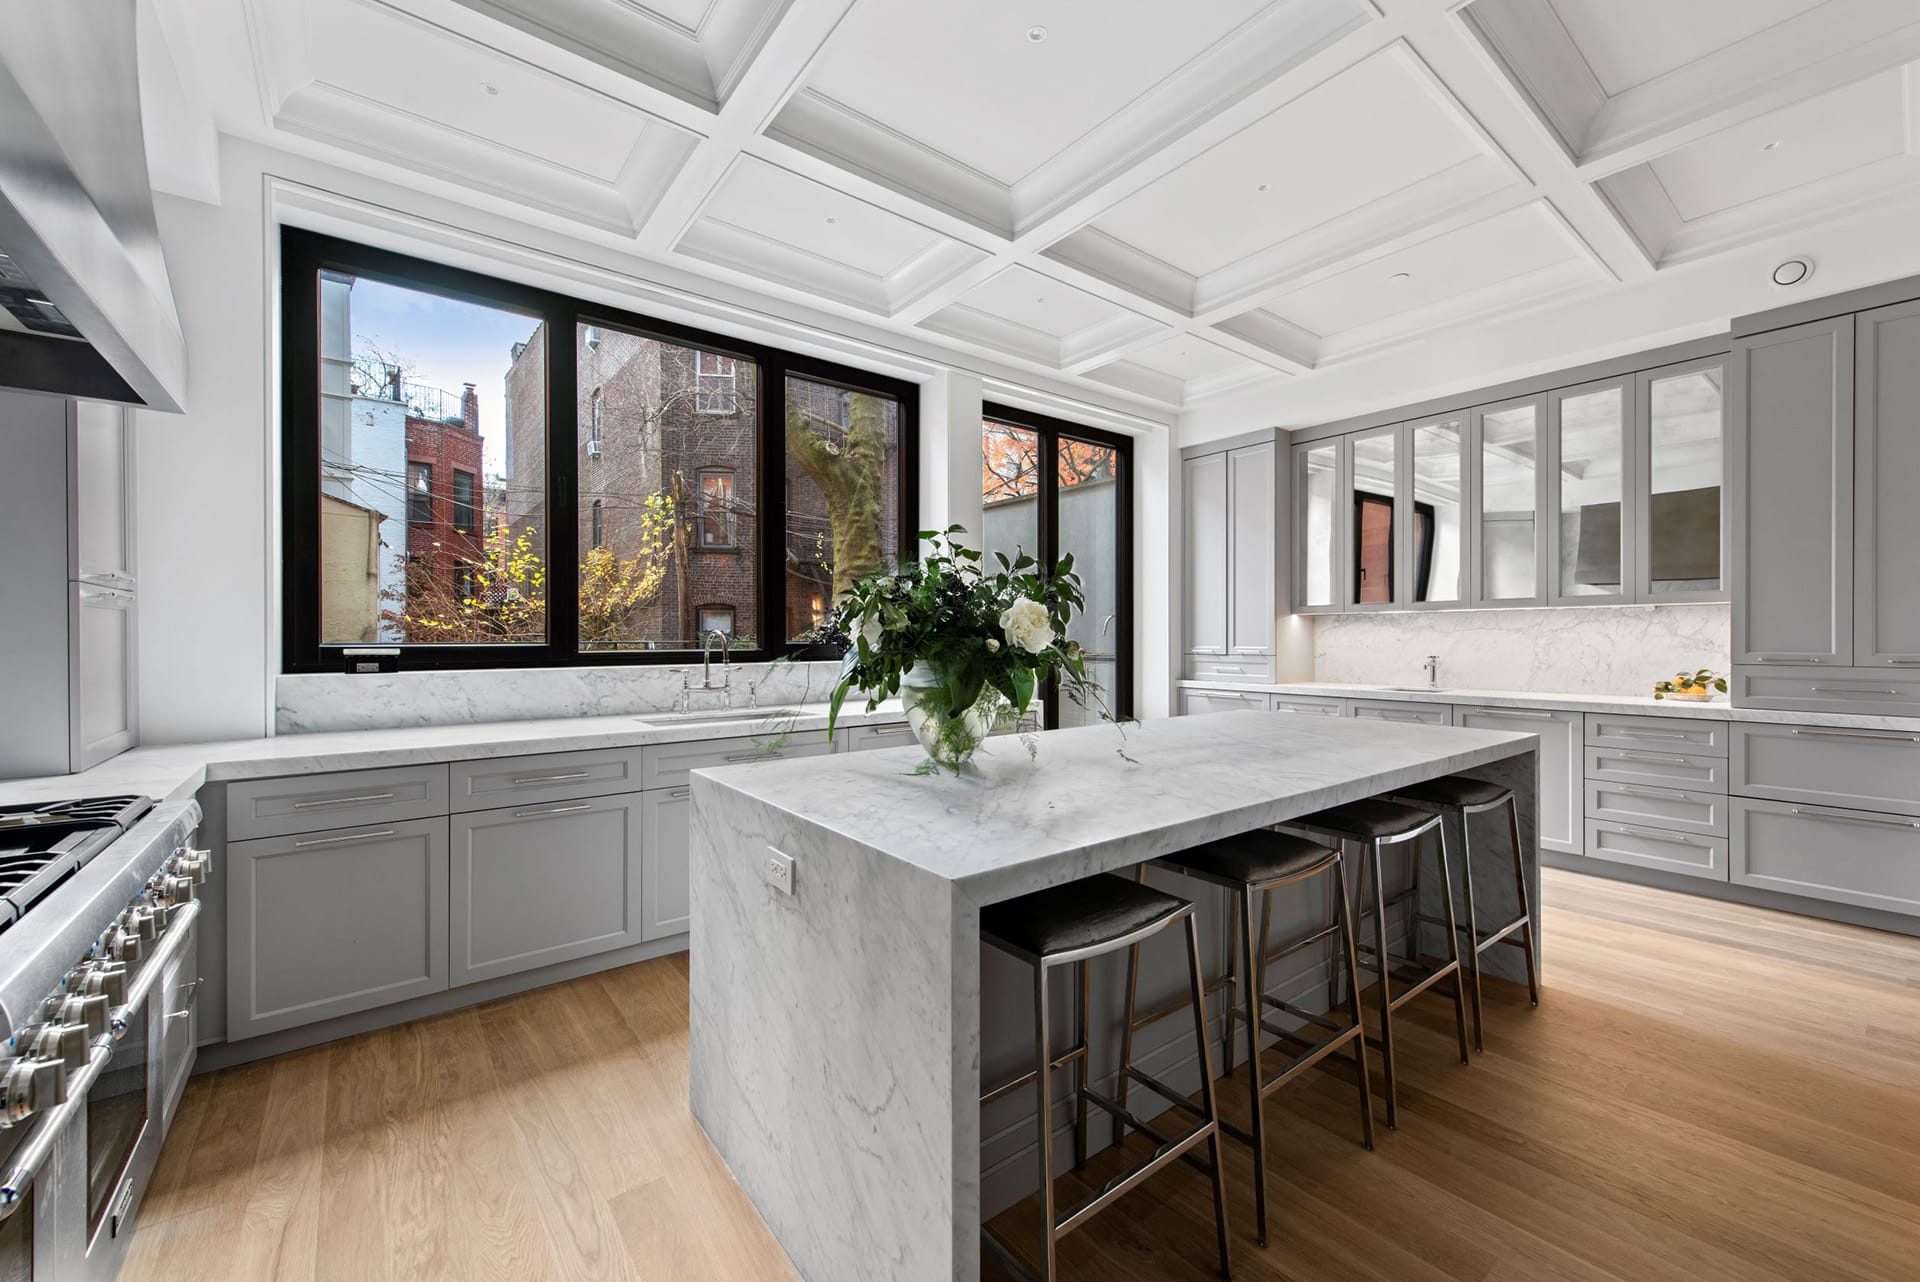 Full-width kitchen in a Brooklyn Heights townhouse with light grey millwork surrounded by marble countertops, island, and backsplash. Four barstools are lined up at the built-in eating area on the island. The high ceilings are covered in paneling.